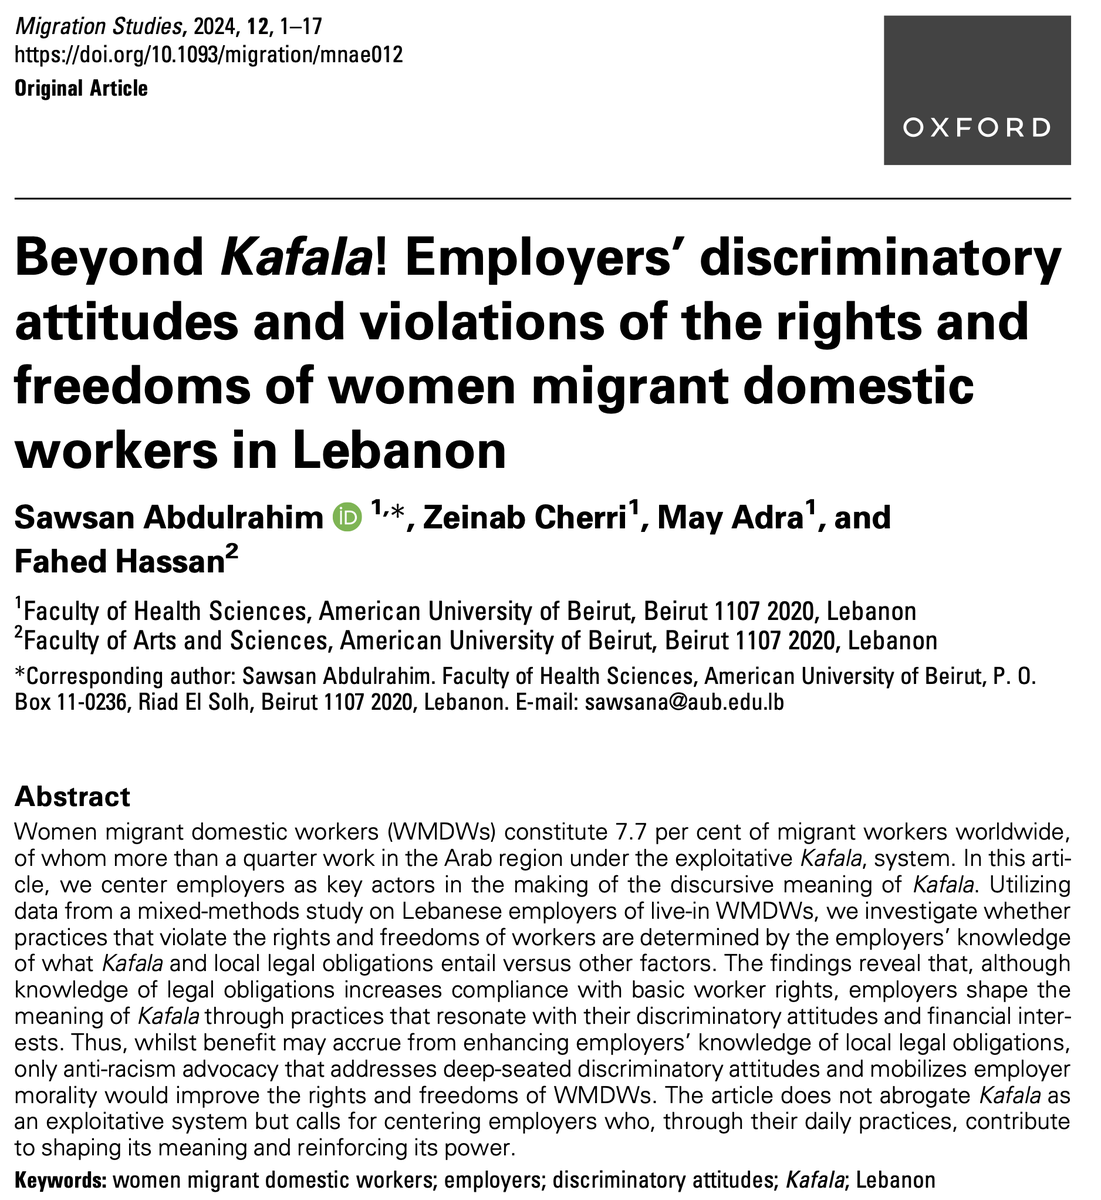 How is the #Kafala system understood and practiced in #Lebanon? Our latest article by @SawsanAUB @zeinabcherri @FHS_AUB @fahed_hassan explores how employers’ practices shape the meaning of Kafala, and how domestic workers’ rights may be better protected: doi.org/10.1093/migrat…